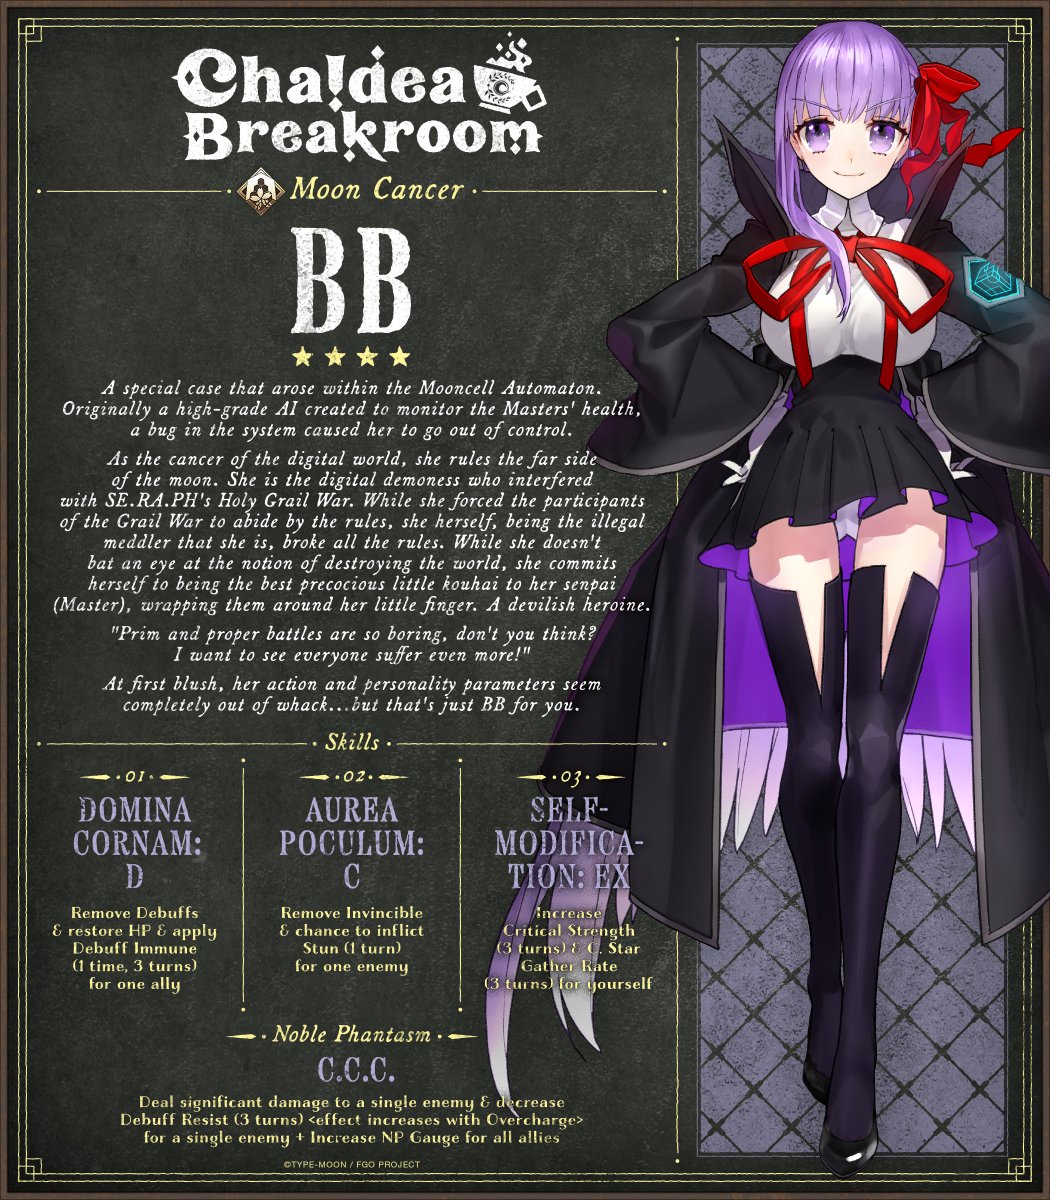 test ツイッターメディア - Chaldea Breakroom Vol. 6 heads to a cyber paradise with an exclusive look at BB and an interview with Second Section Director of FGO, KANOU YOSHIKI!

#ChaldeaBreakroom, an exclusive look at Servants and interviews with the staff behind Fate/Grand Order! #FateGOUSA https://t.co/STiFdfiVZb